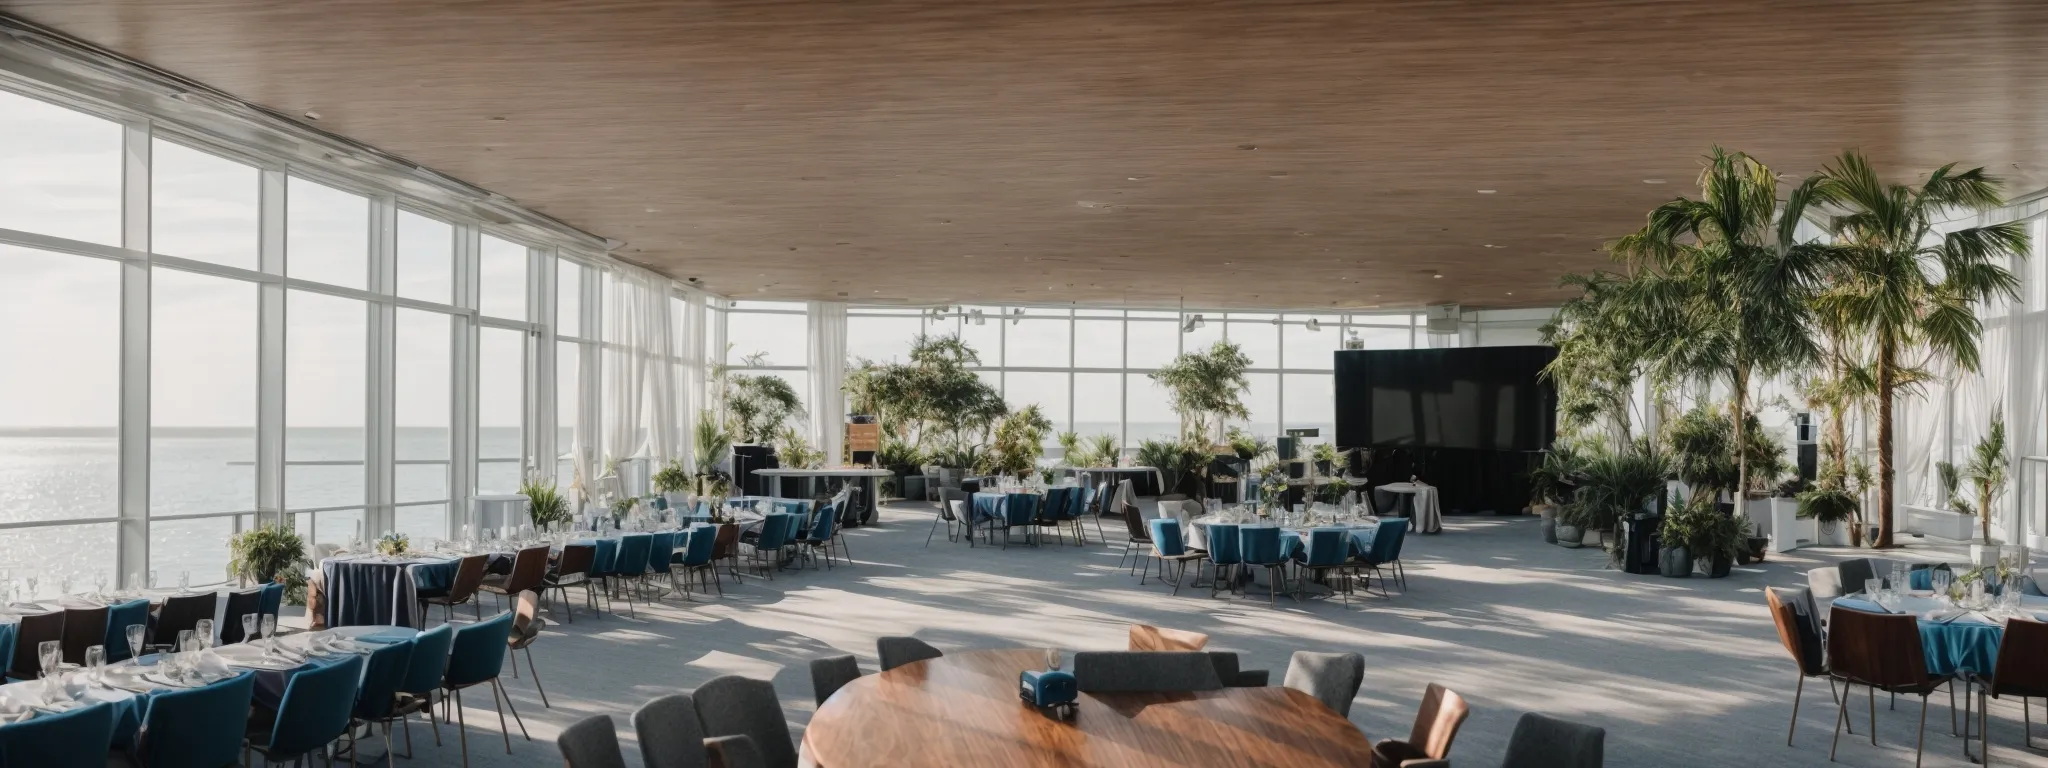 a seaside conference venue with a fusion of modern tech setups and nautical decor overlooking the tranquil maryland coast.